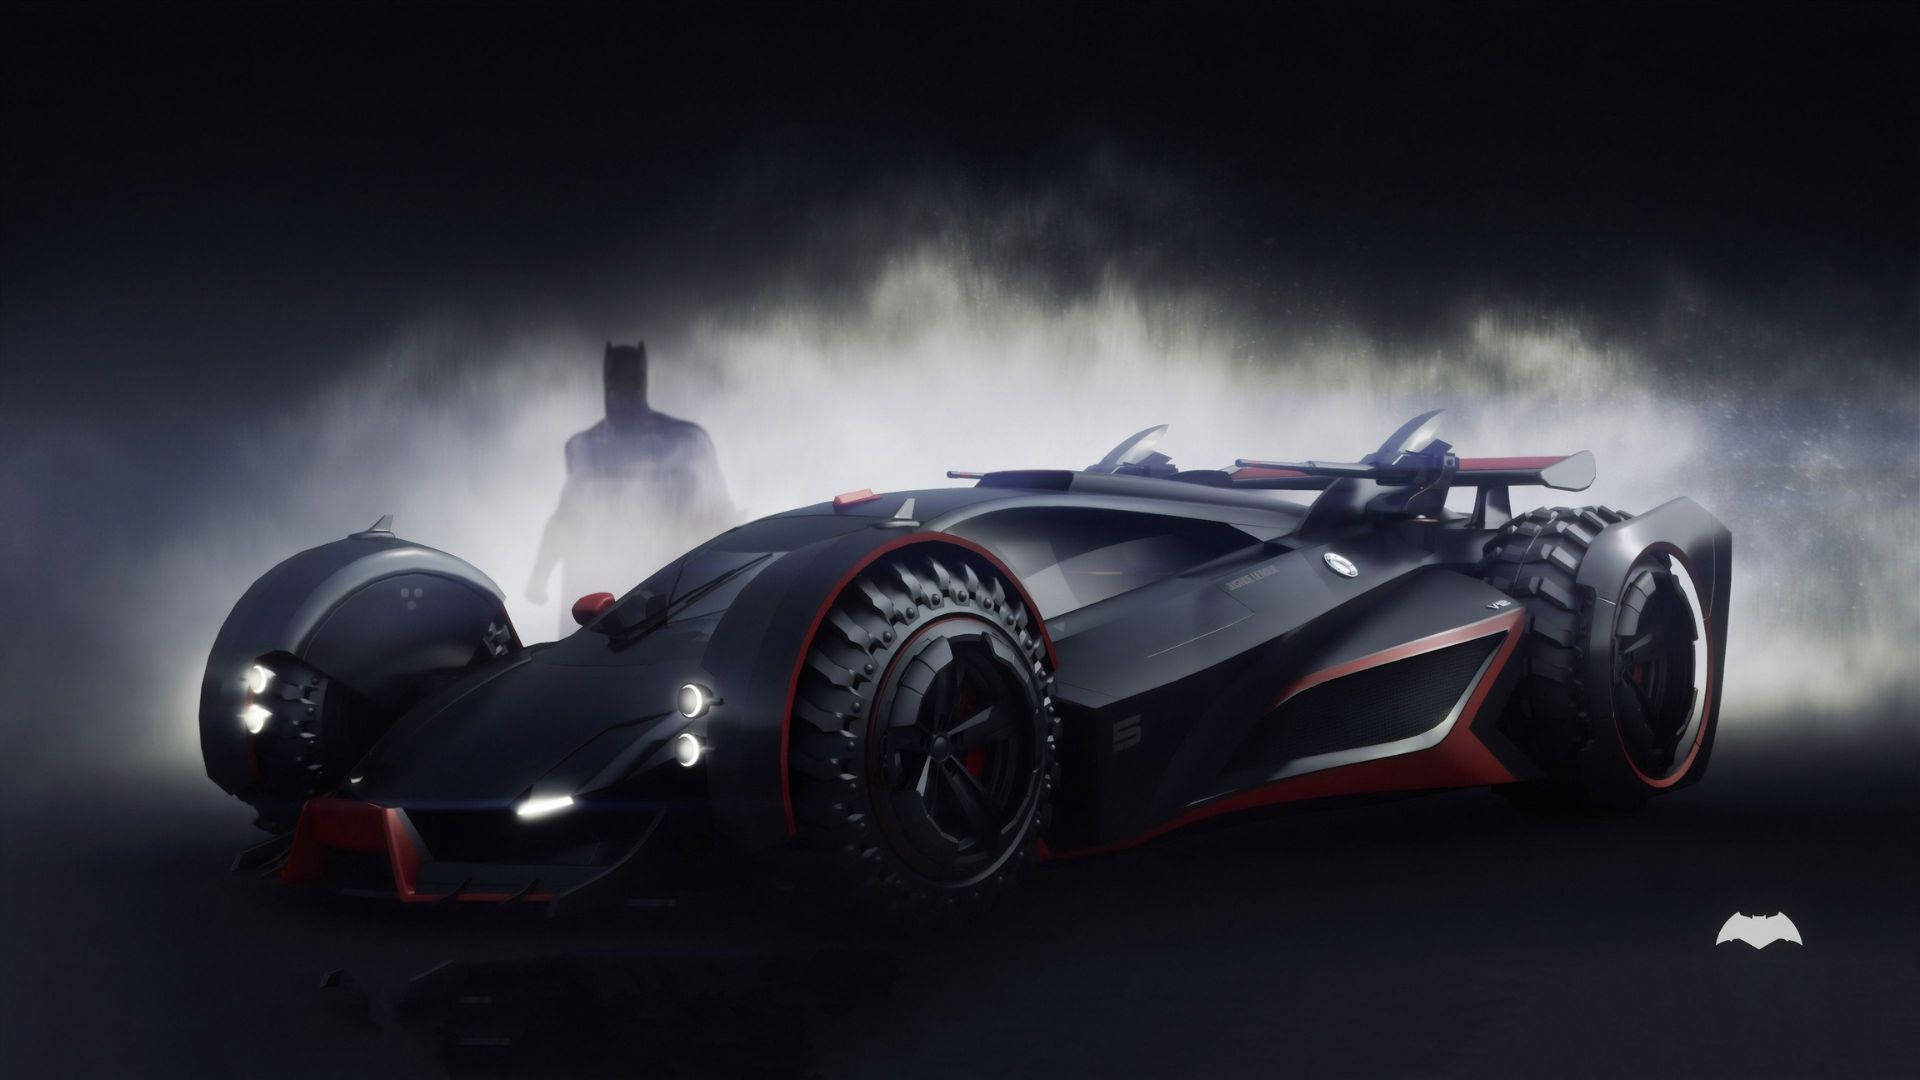 Batmobile In The Foggy Place